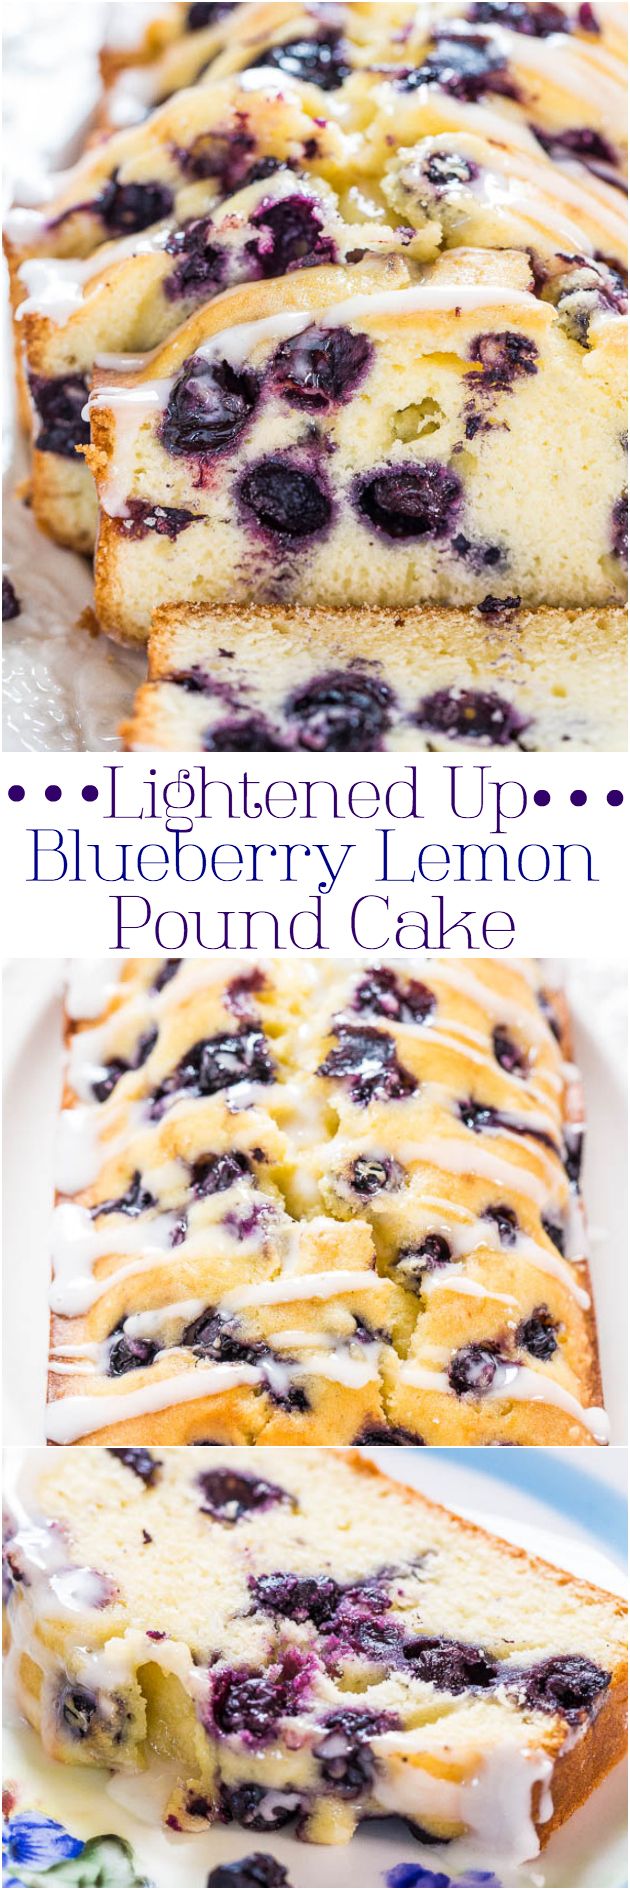 Lightened Up Blueberry Lemon Pound Cake – No BUTTER in this healthier cake with big juicy blueberries and refreshing lemon!! It’s